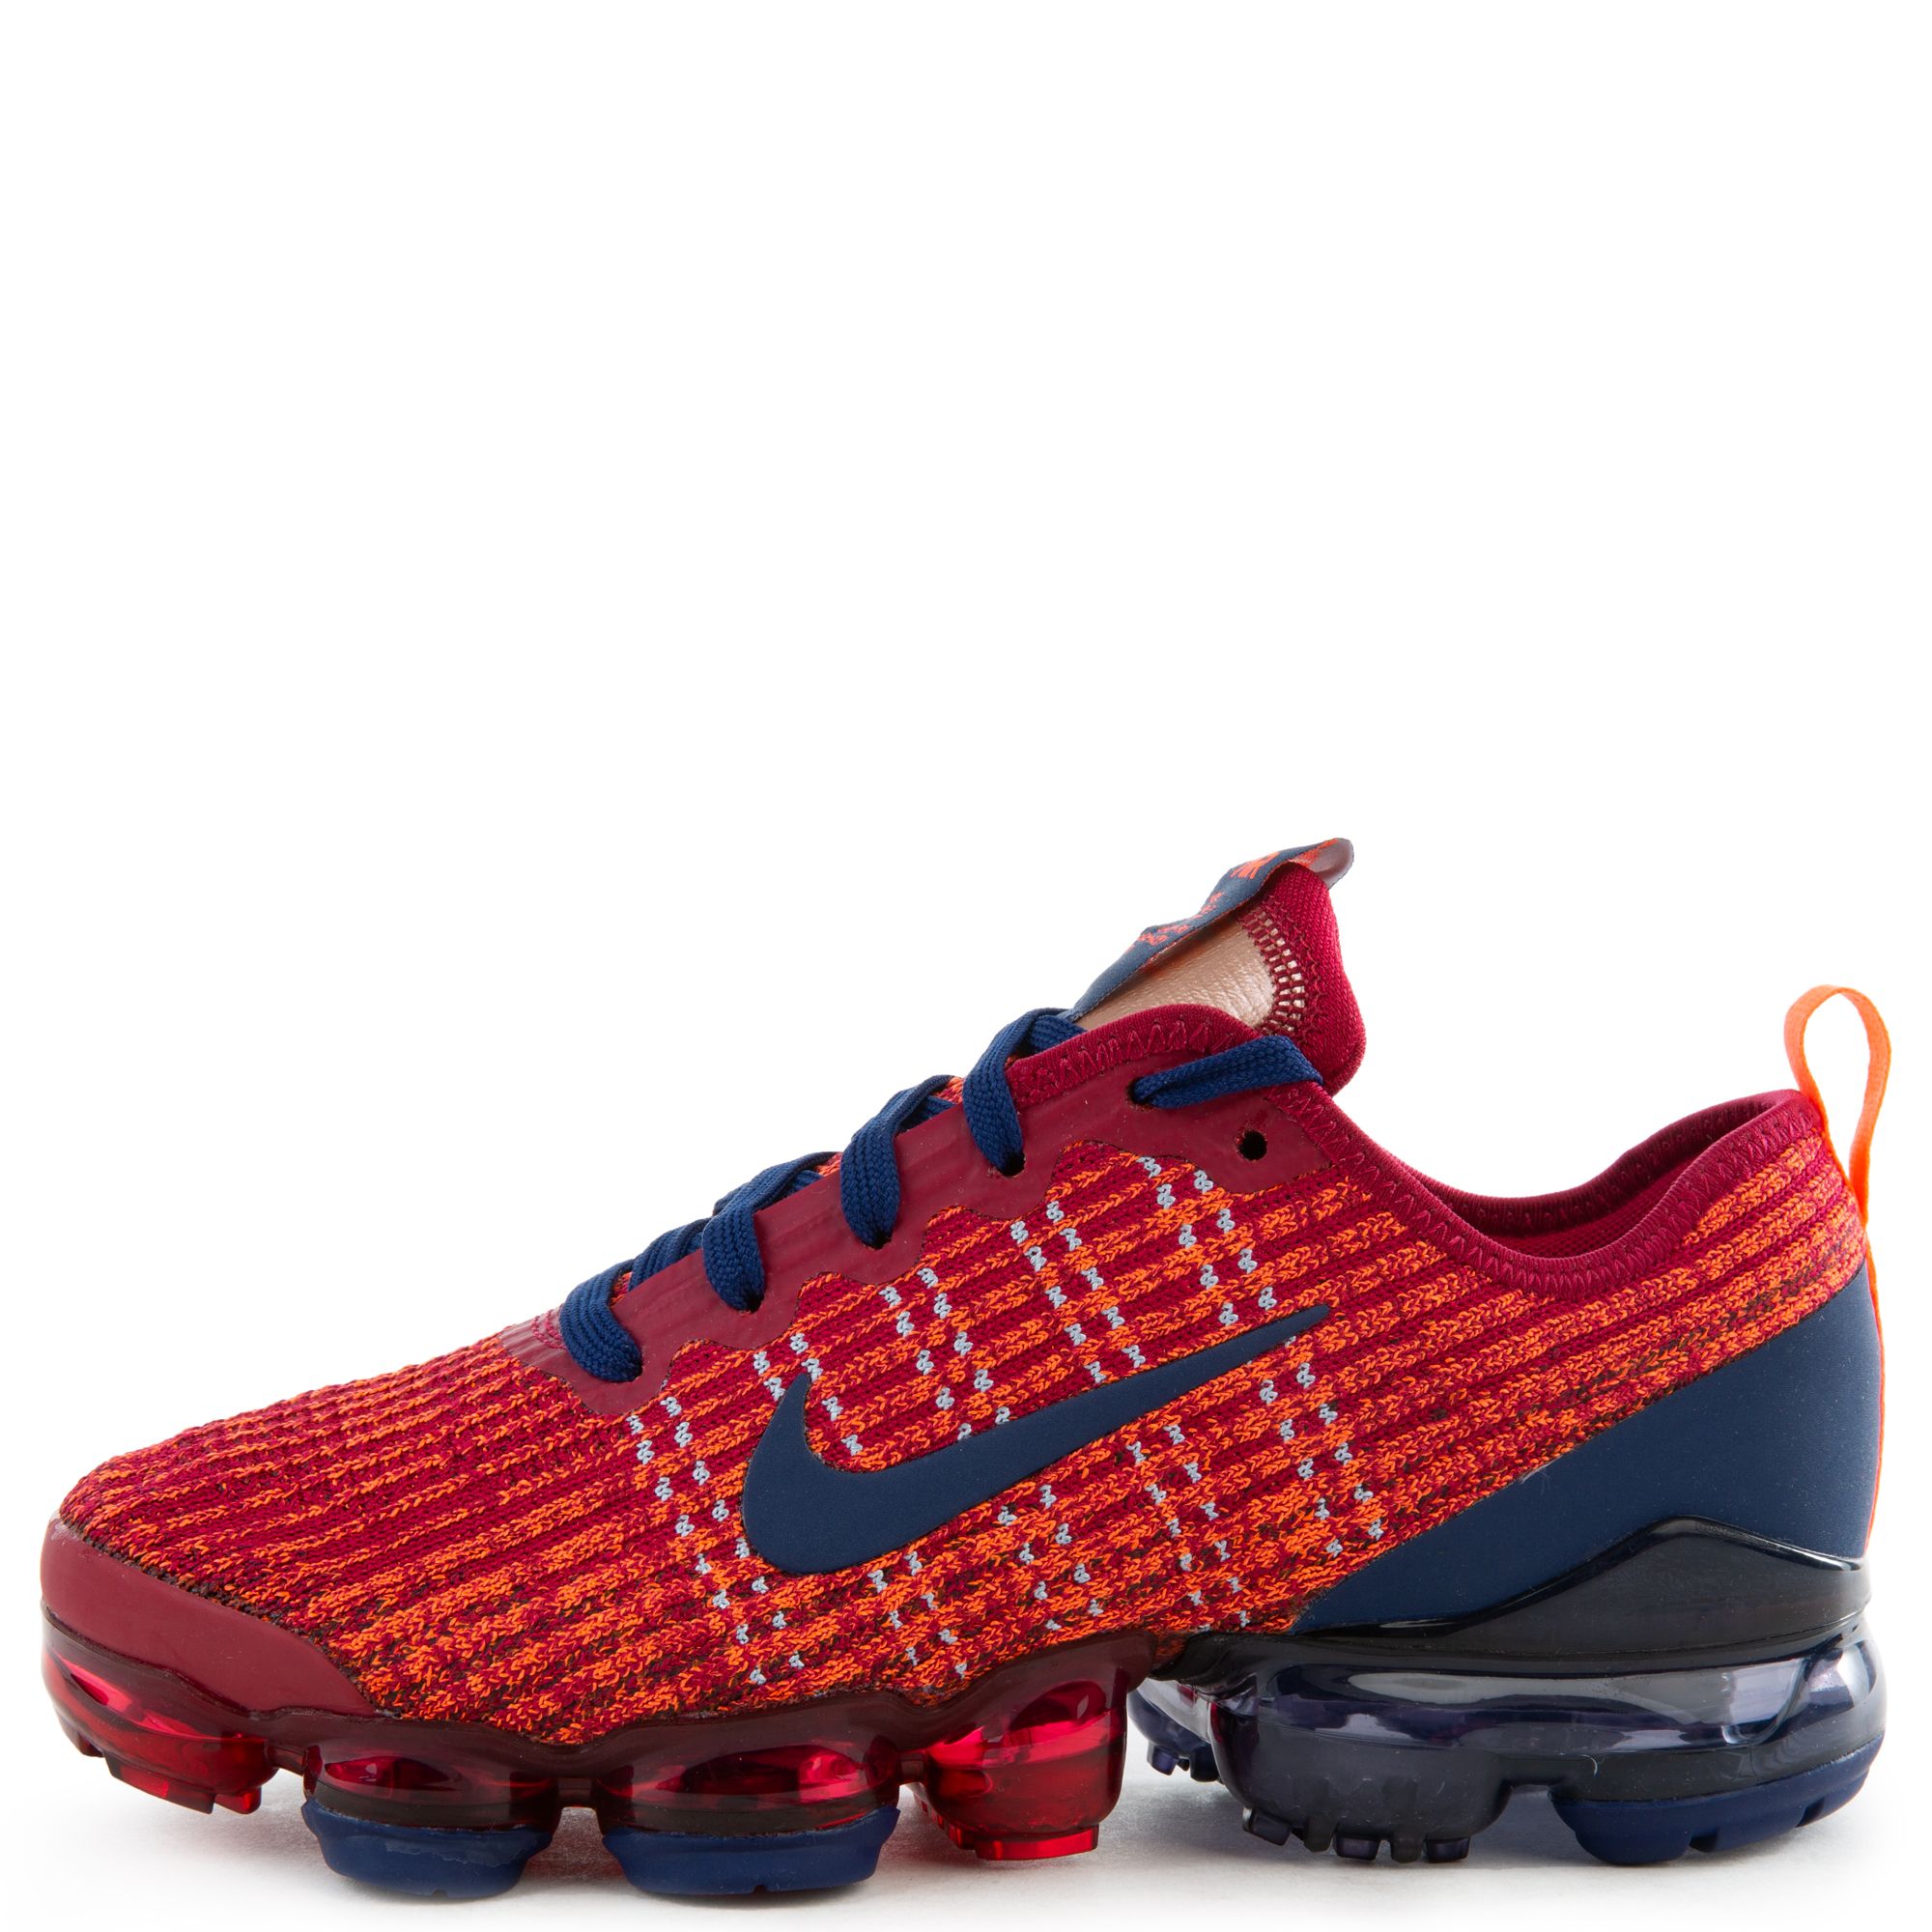 vapormax flyknit red and blue